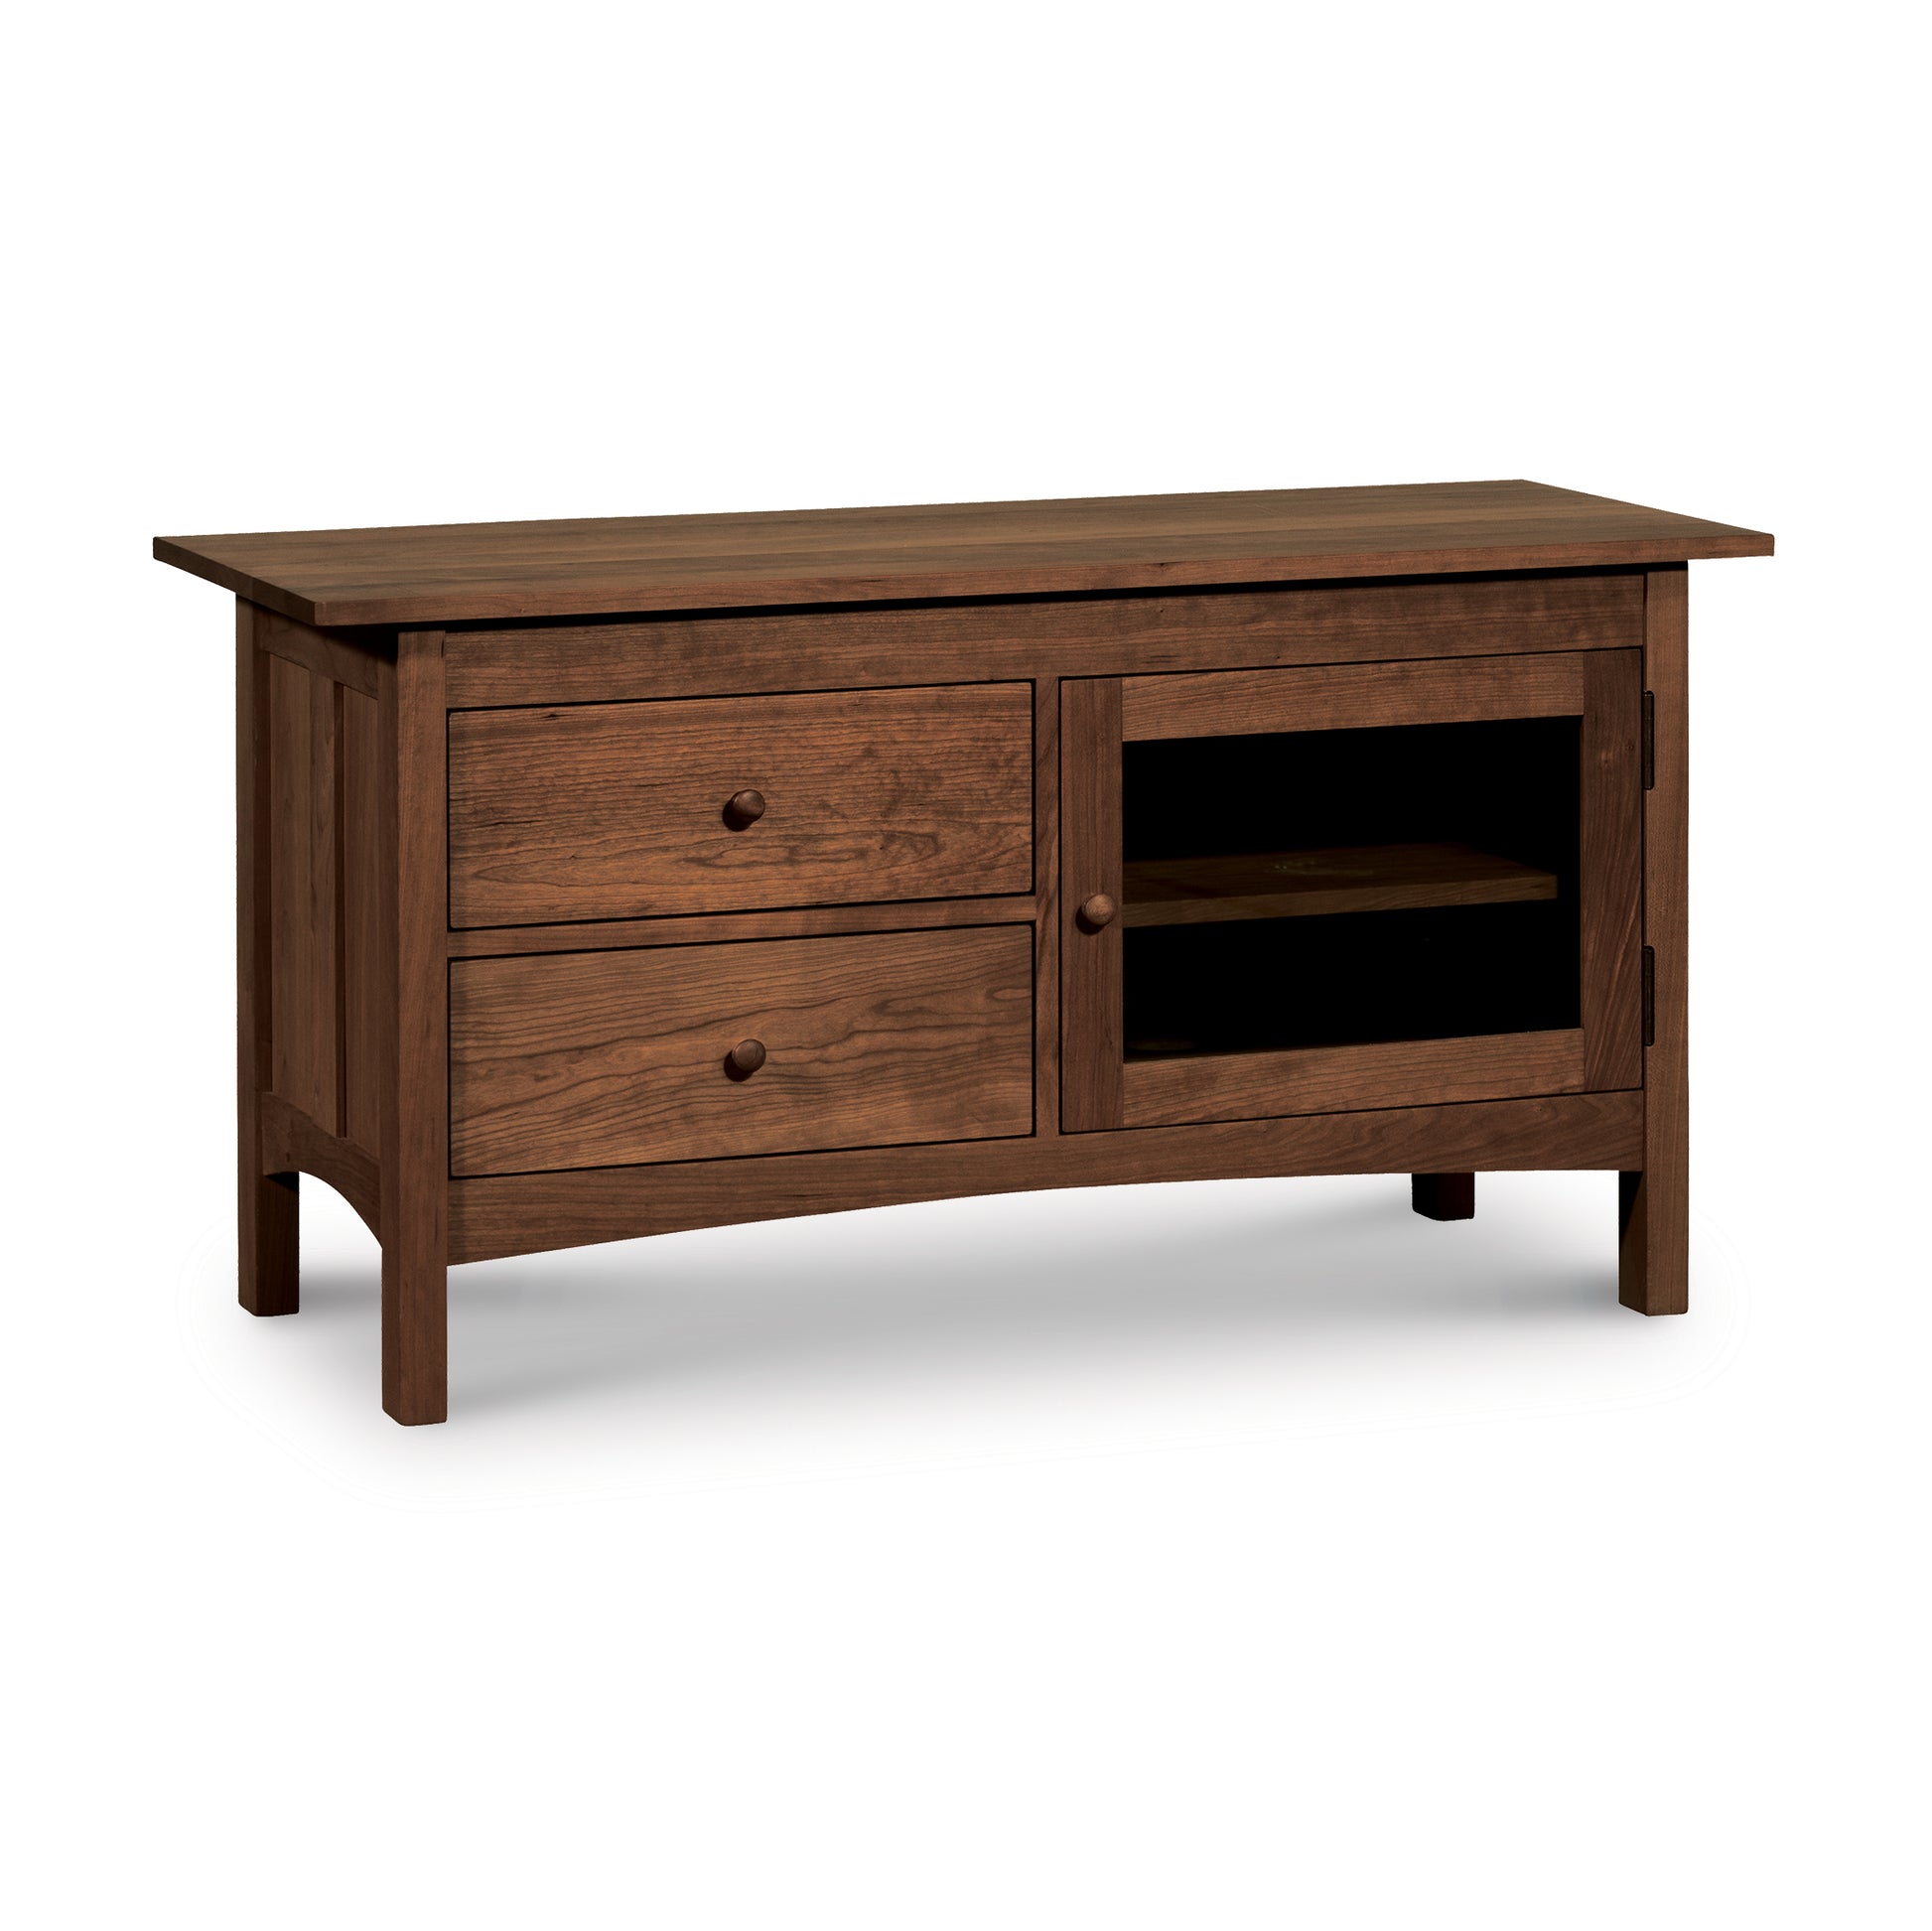 Burlington Shaker Two Drawer Media Console crafted in a Vermont Furniture Designs Shaker Style as a natural cherry solid wood entertainment cabinet, on a white background.